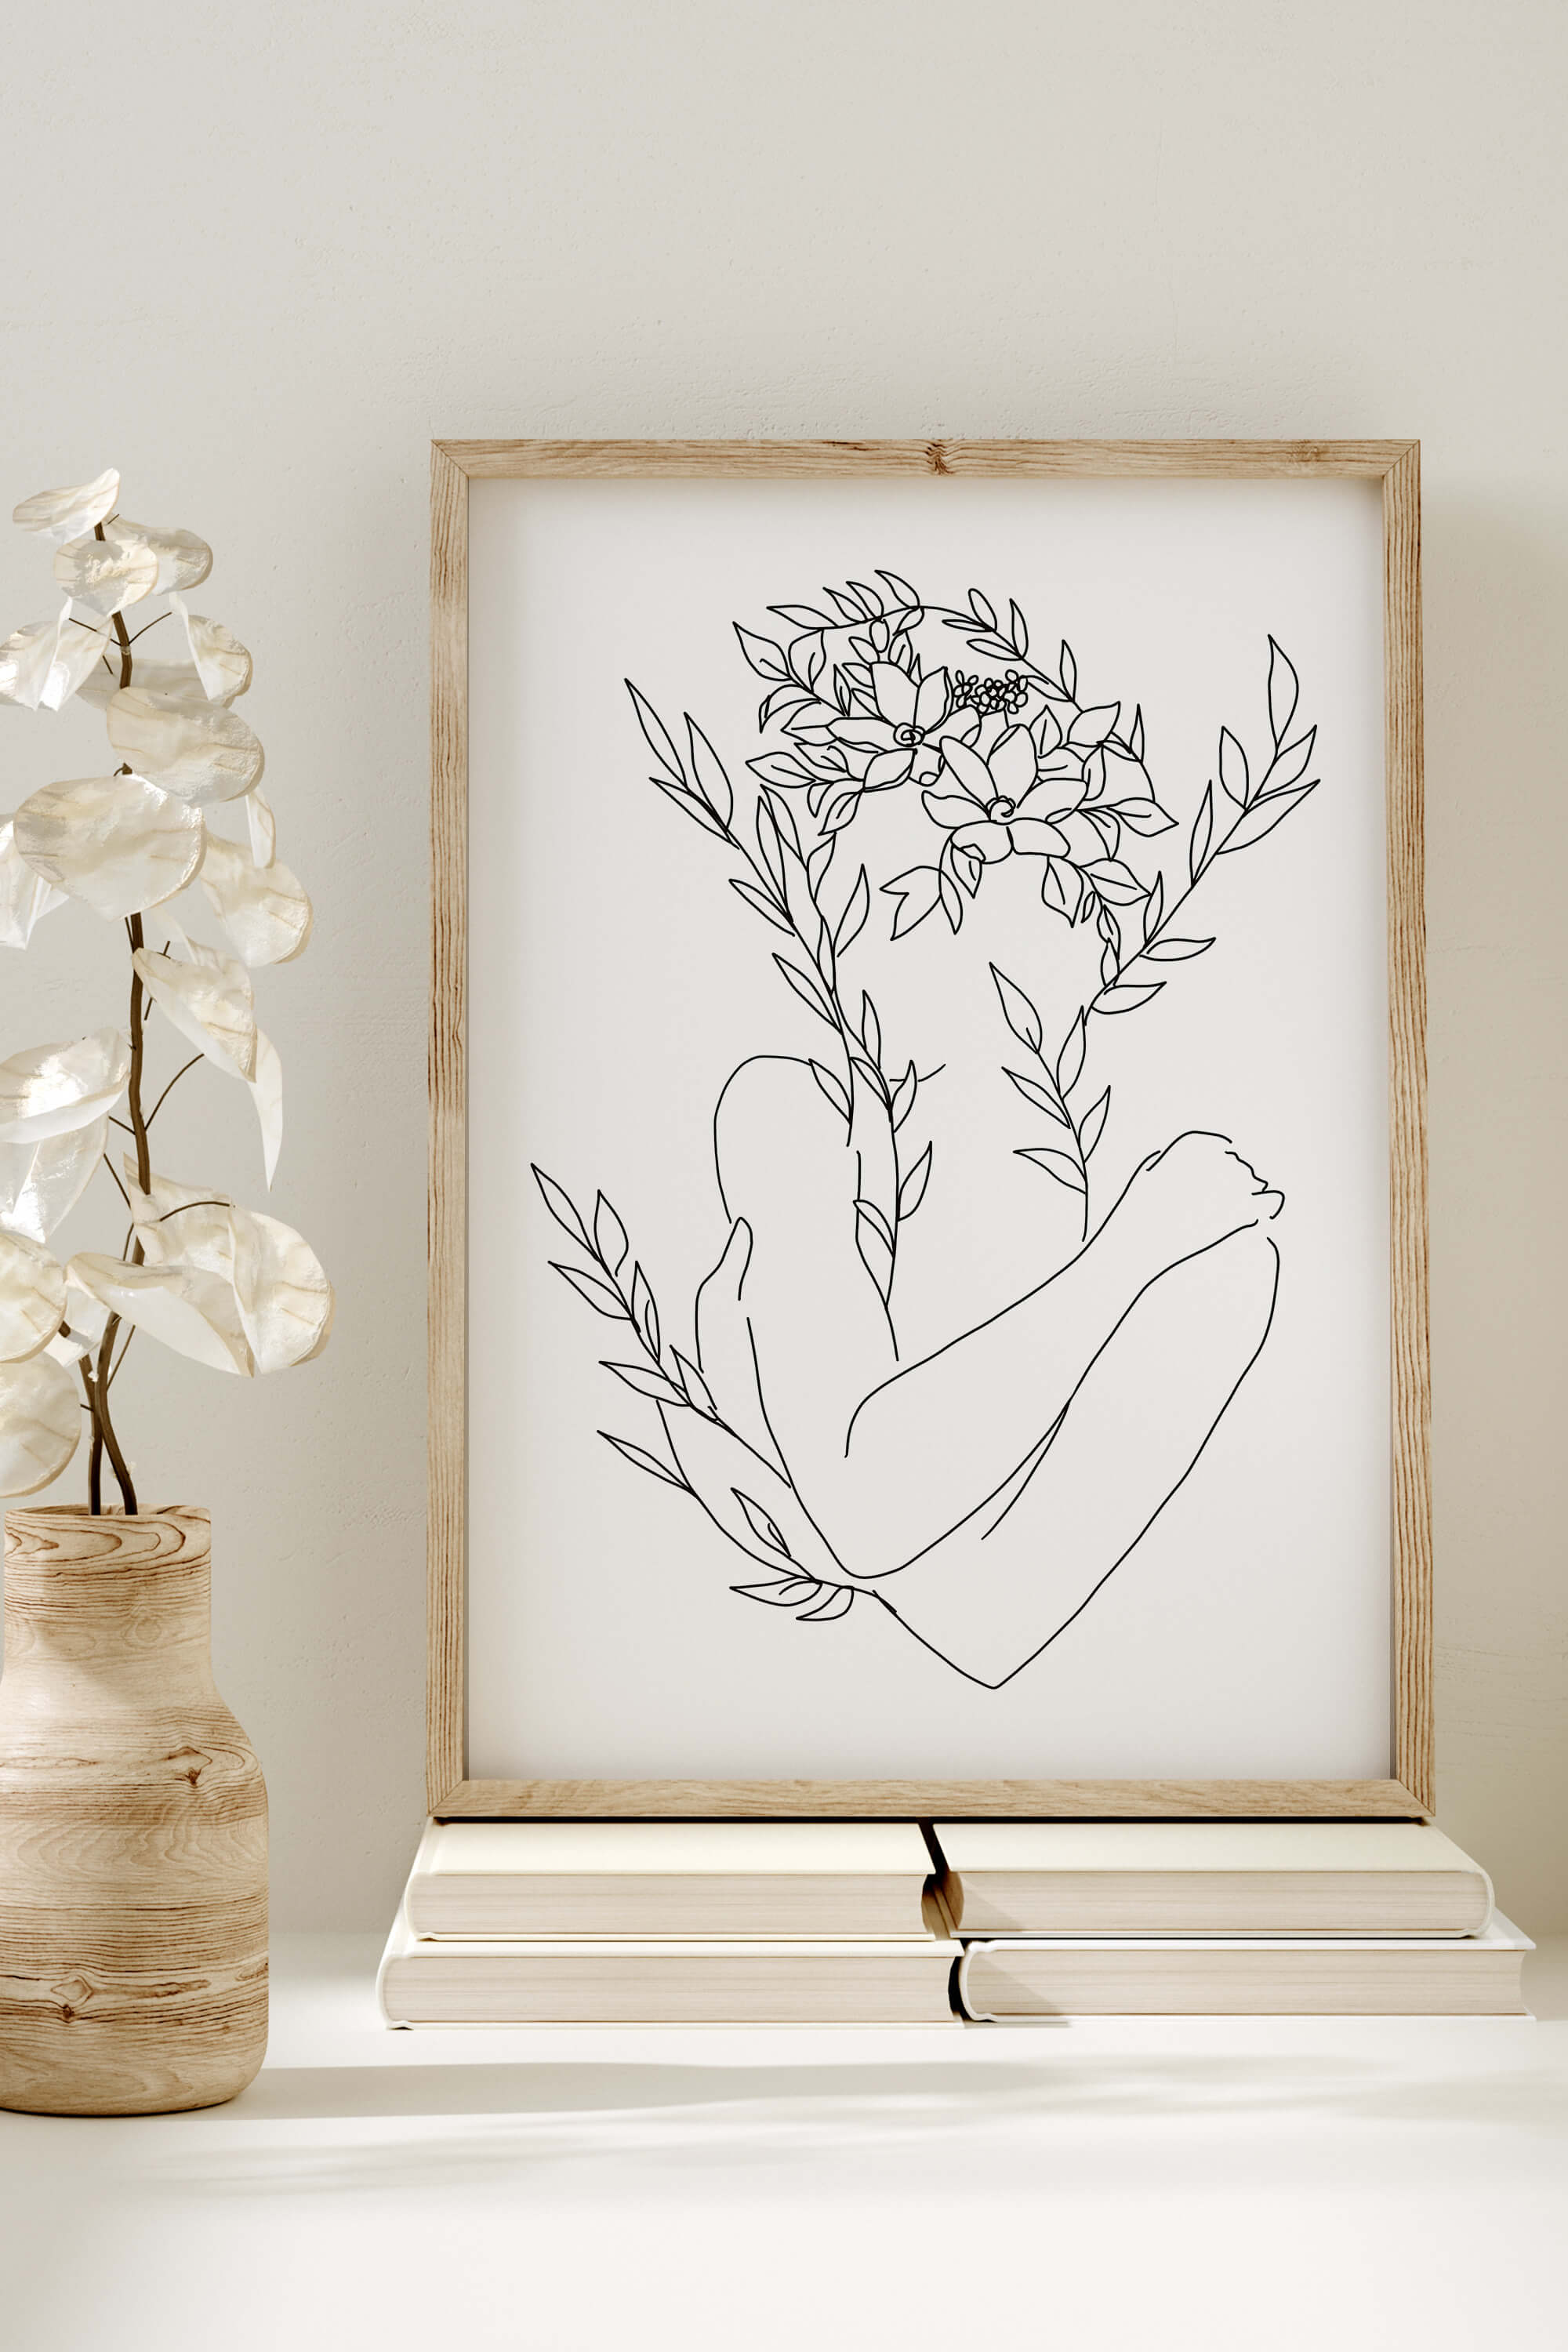 Discover the charm of line art and the beauty of greenery in this bedroom decor piece. Each stroke tells a story of the human body adorned with floral elements, creating a powerful and serene ambiance. Immerse yourself in the allure of monochrome sophistication.